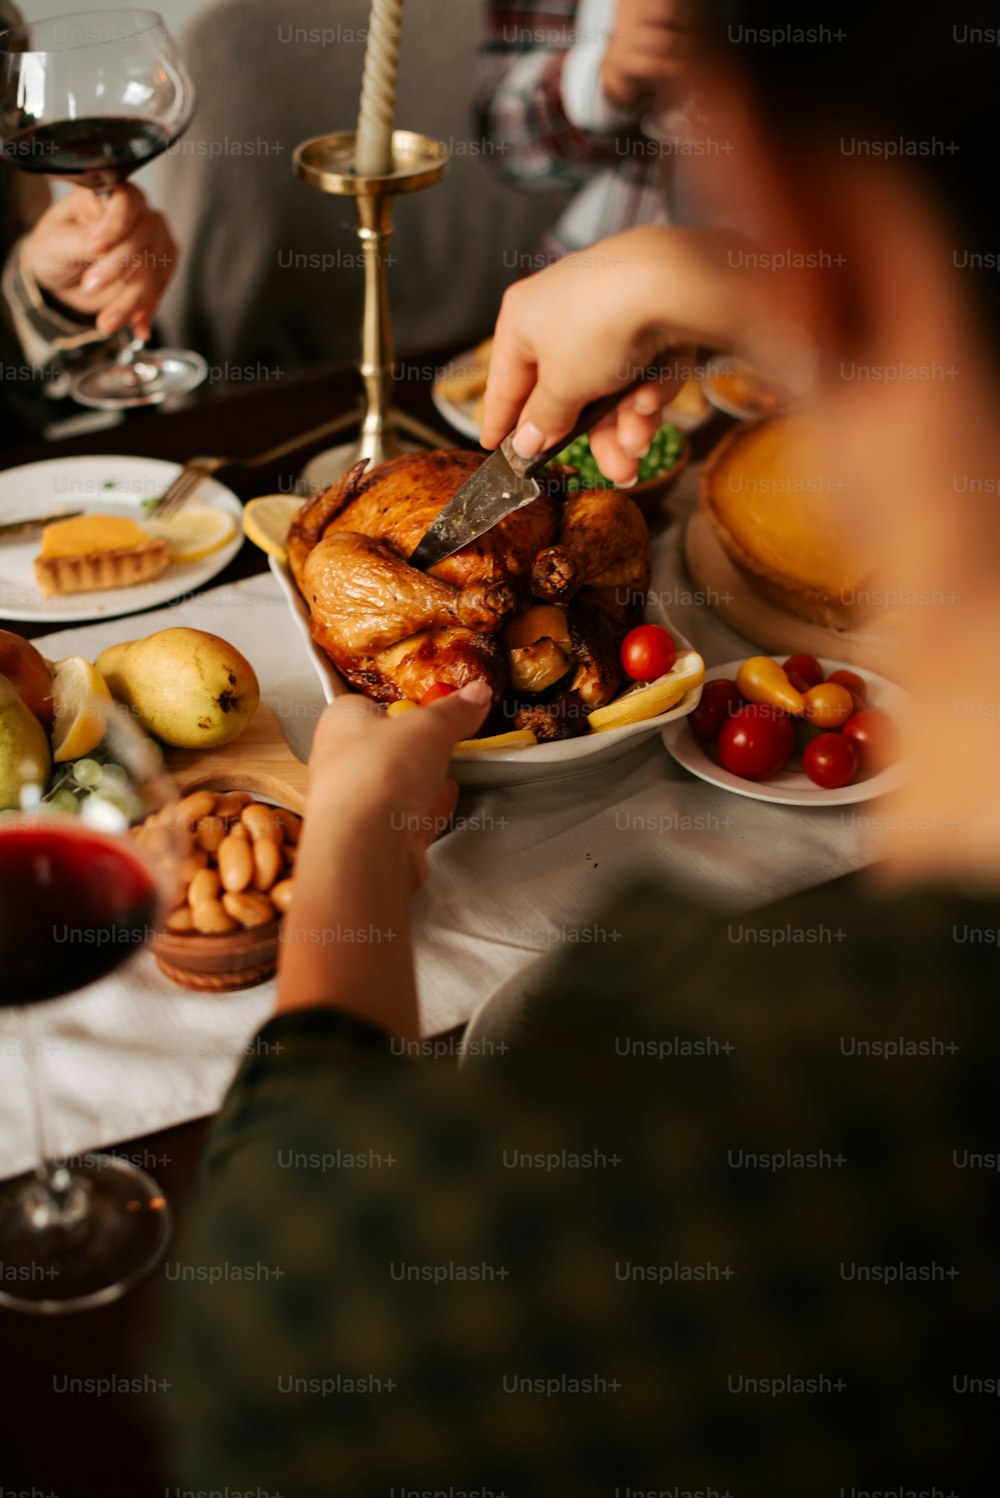 a person cutting a turkey on a table